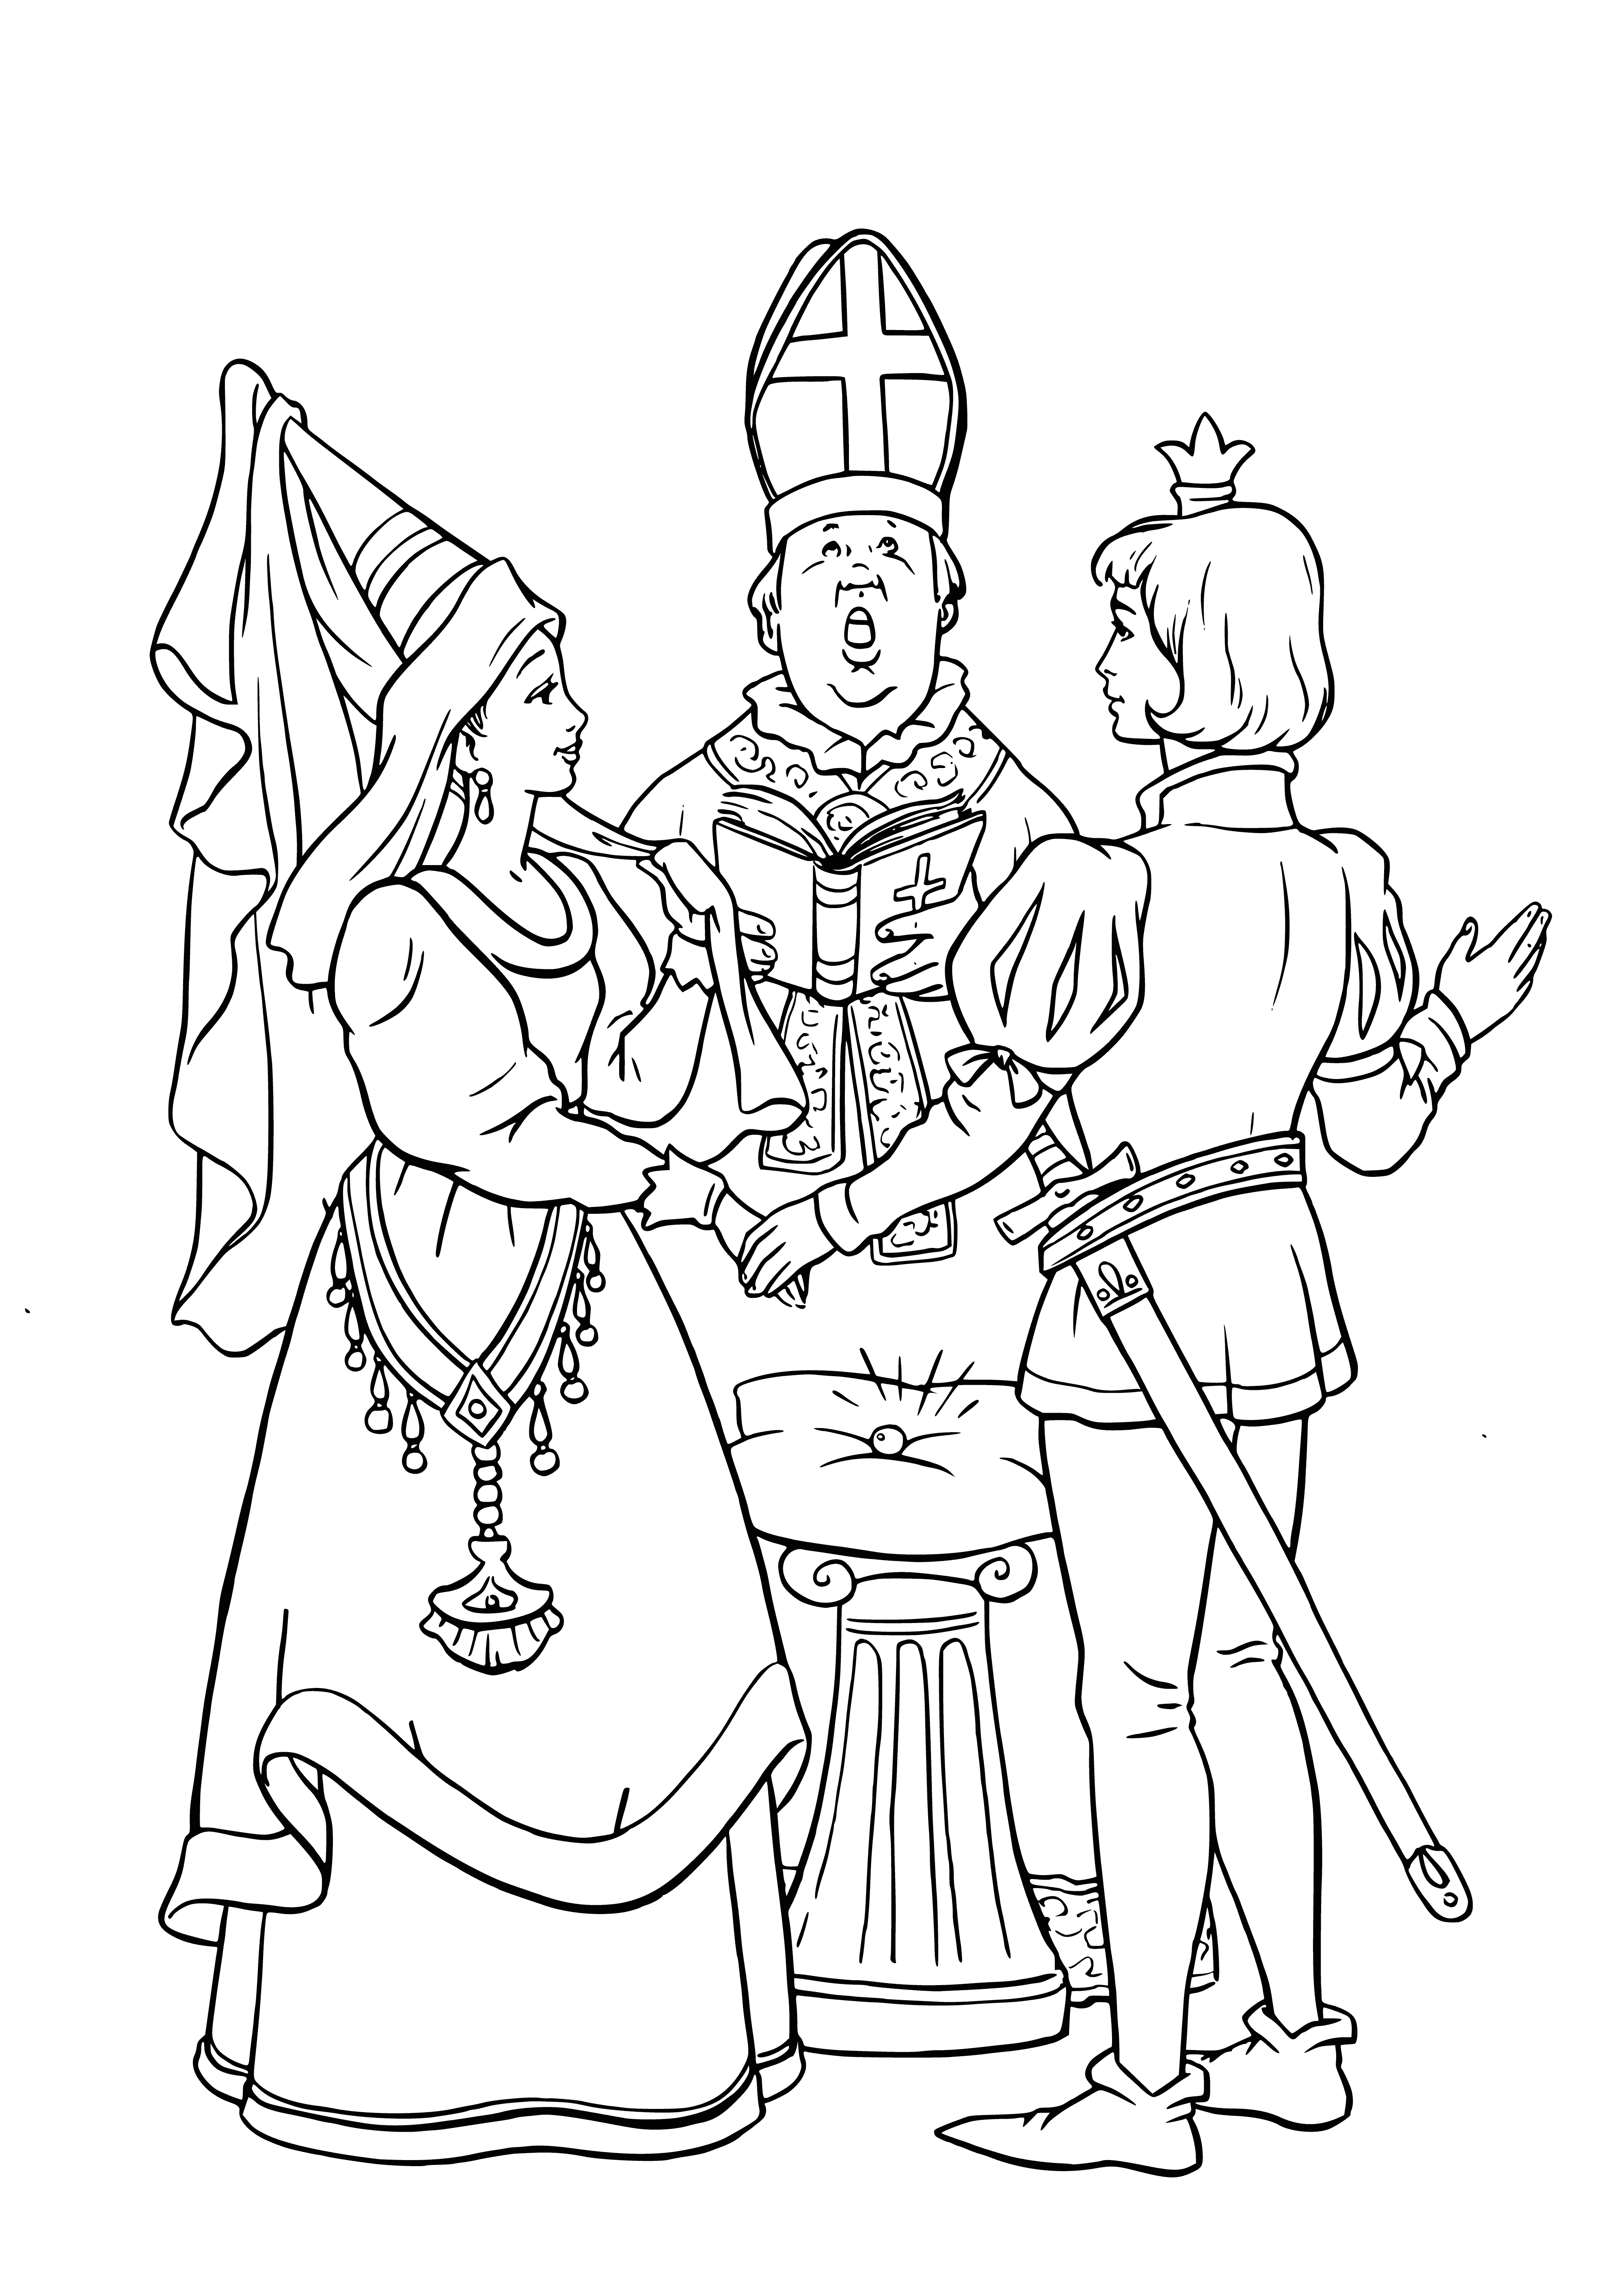 coloring page: Prince, princess marry in beautiful church. Bride in white dress and veil, groom in white suit. Crowd of people watching, all smiling. #WeddingDay